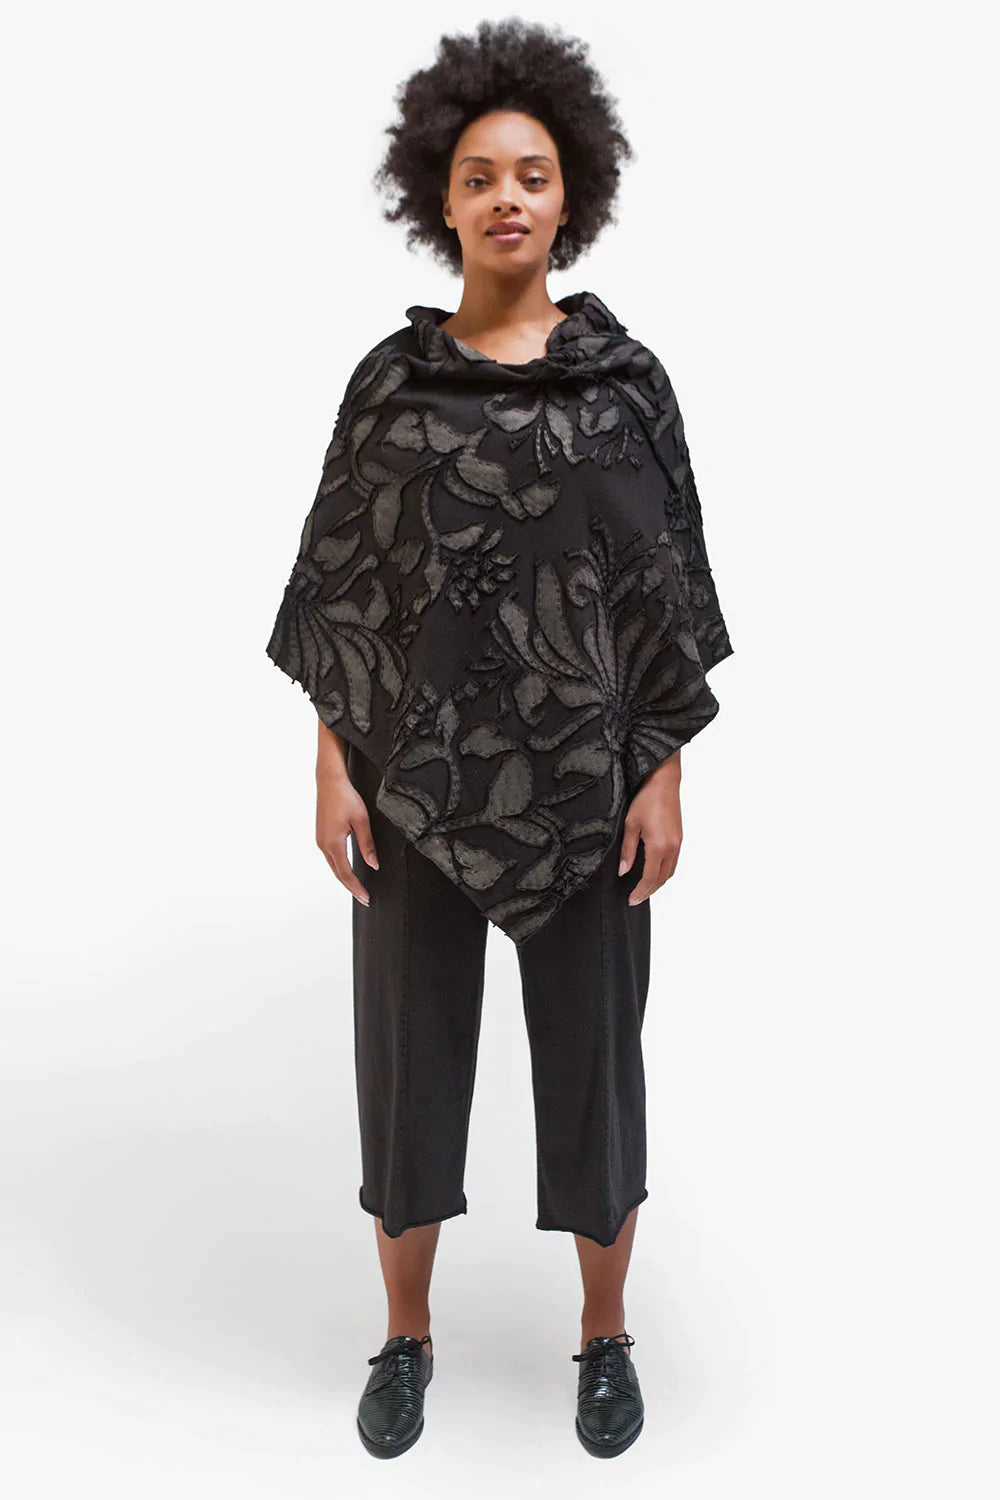 The School of Making The Poncho Kit Hand-Sewn with Floral Pattern and Metallic Textile Paint.